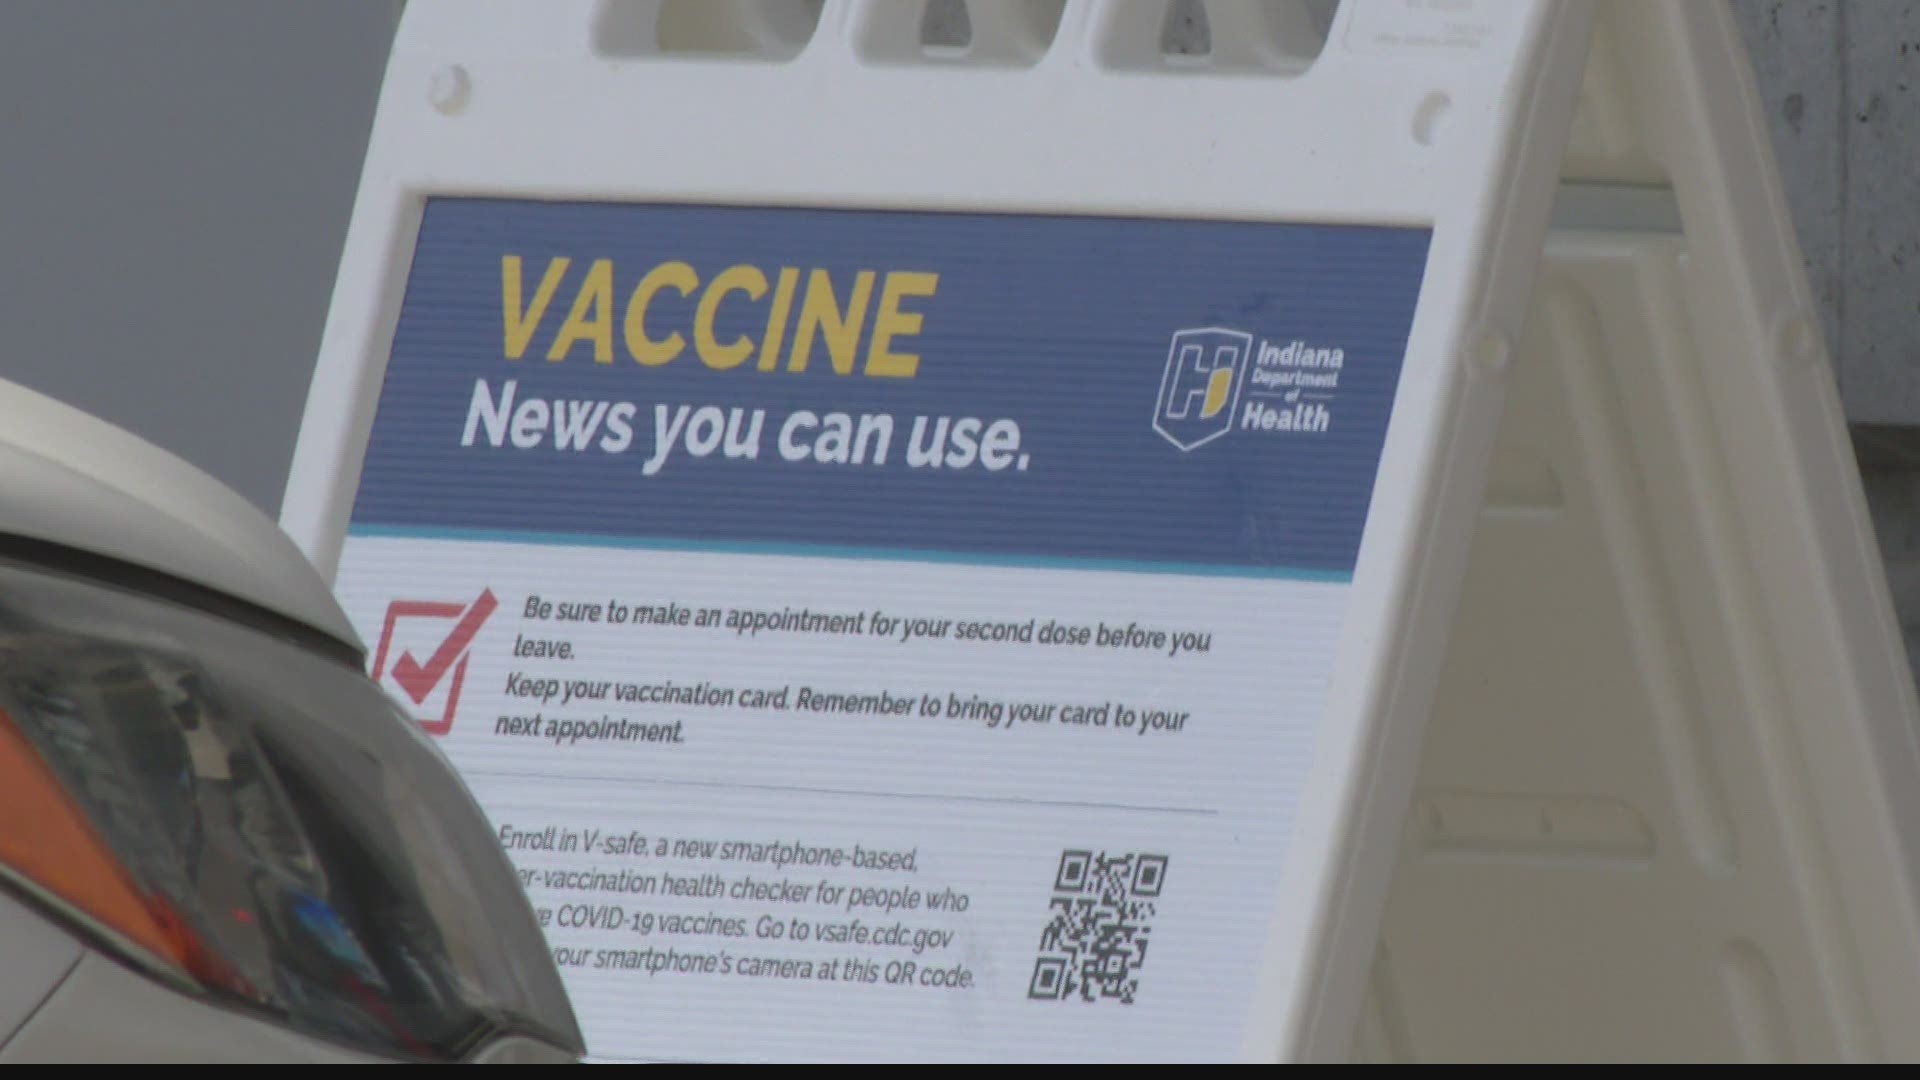 The social media and outreach campaign will feature the voices of trusted community members explaining why they got the vaccine, along with COVID-19 information.